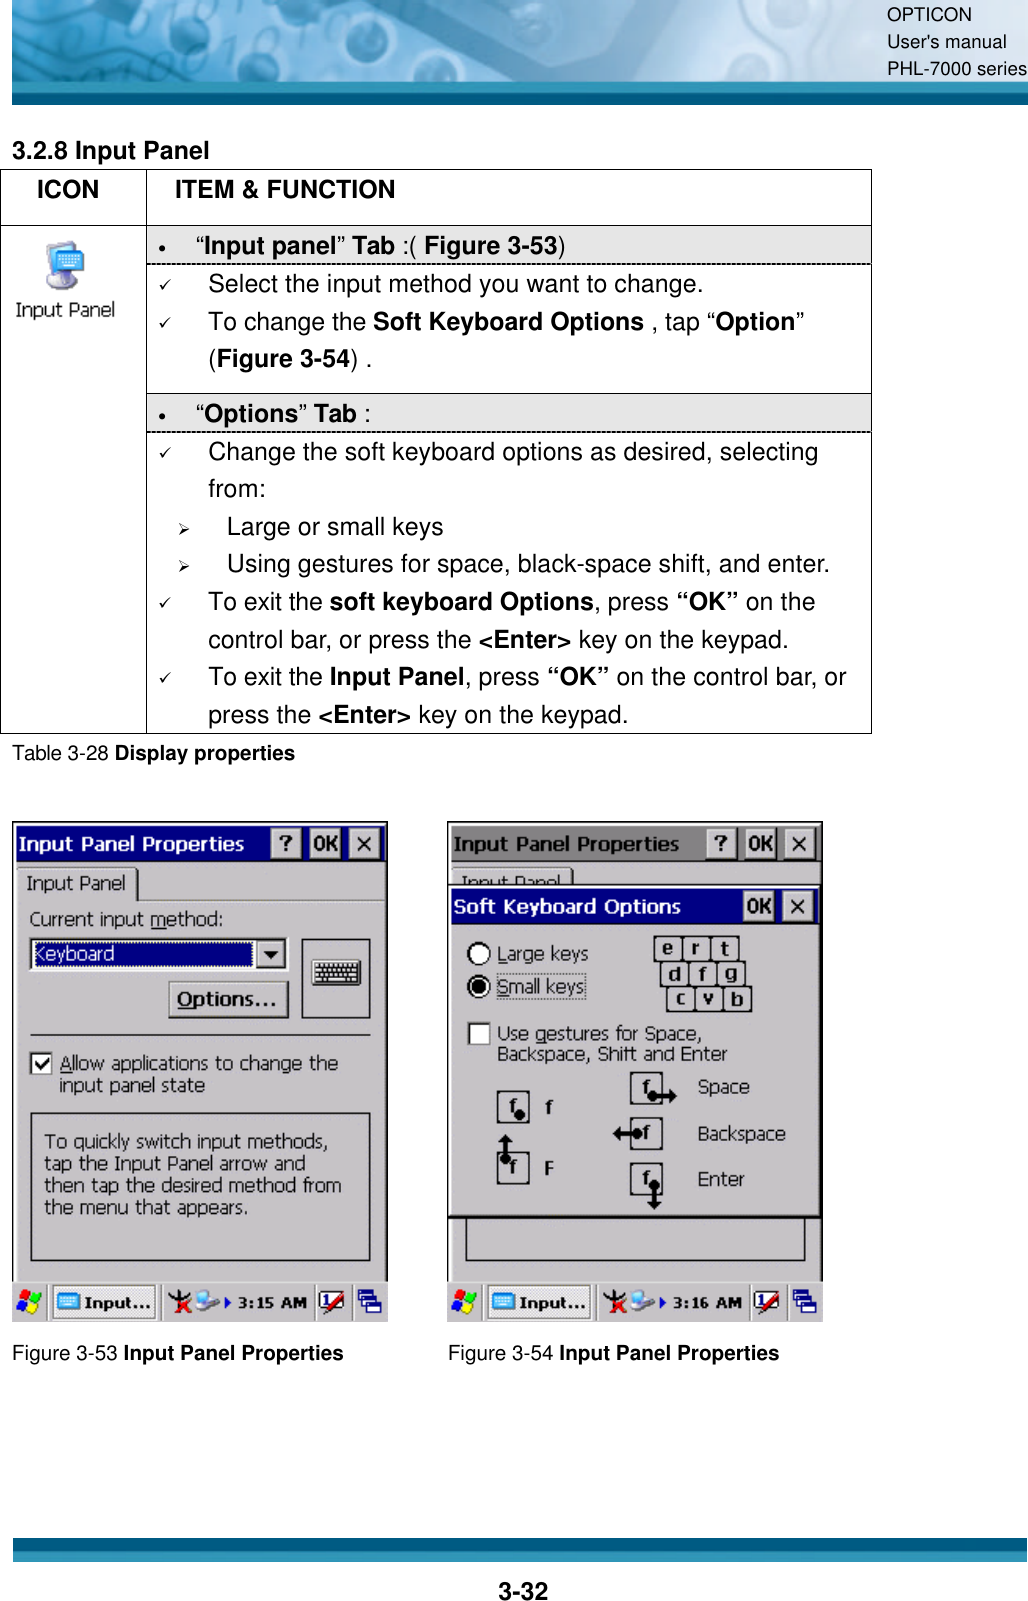 OPTICON User&apos;s manual PHL-7000 series    3-32 3.2.8 Input Panel   ICON  ITEM &amp; FUNCTION • “Input panel”  Tab :( Figure 3-53)   ü Select the input method you want to change. ü To change the Soft Keyboard Options , tap “Option” (Figure 3-54) . • “Options”  Tab :    ü Change the soft keyboard options as desired, selecting from: Ø Large or small keys Ø Using gestures for space, black-space shift, and enter. ü To exit the soft keyboard Options, press “OK” on the control bar, or press the &lt;Enter&gt; key on the keypad. ü To exit the Input Panel, press “OK” on the control bar, or press the &lt;Enter&gt; key on the keypad. Table 3-28 Display properties     Figure 3-53 Input Panel Properties Figure 3-54 Input Panel Properties   